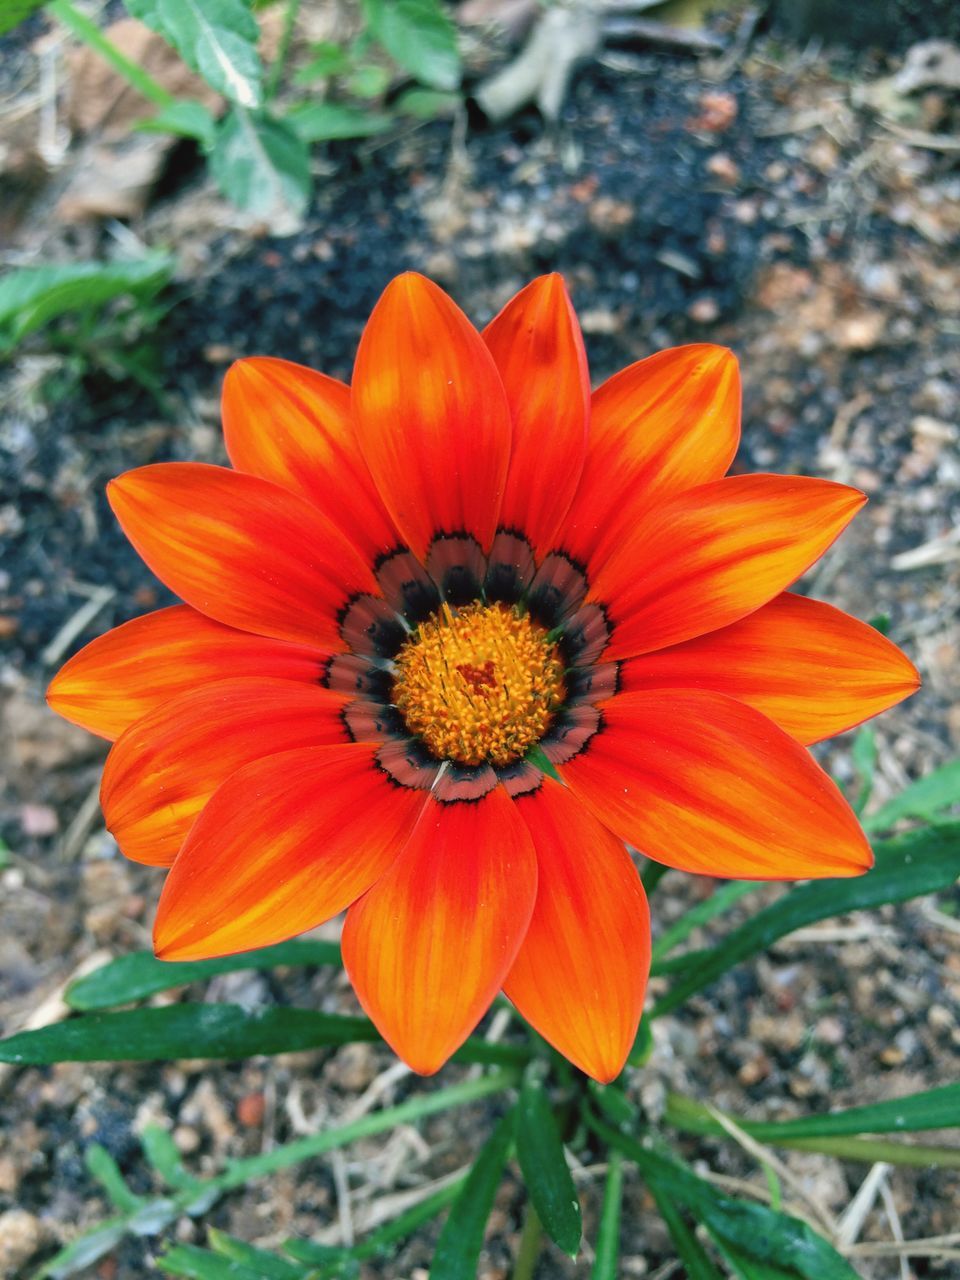 flower, fragility, petal, freshness, nature, beauty in nature, flower head, orange color, growth, blooming, pollen, close-up, focus on foreground, outdoors, plant, day, no people